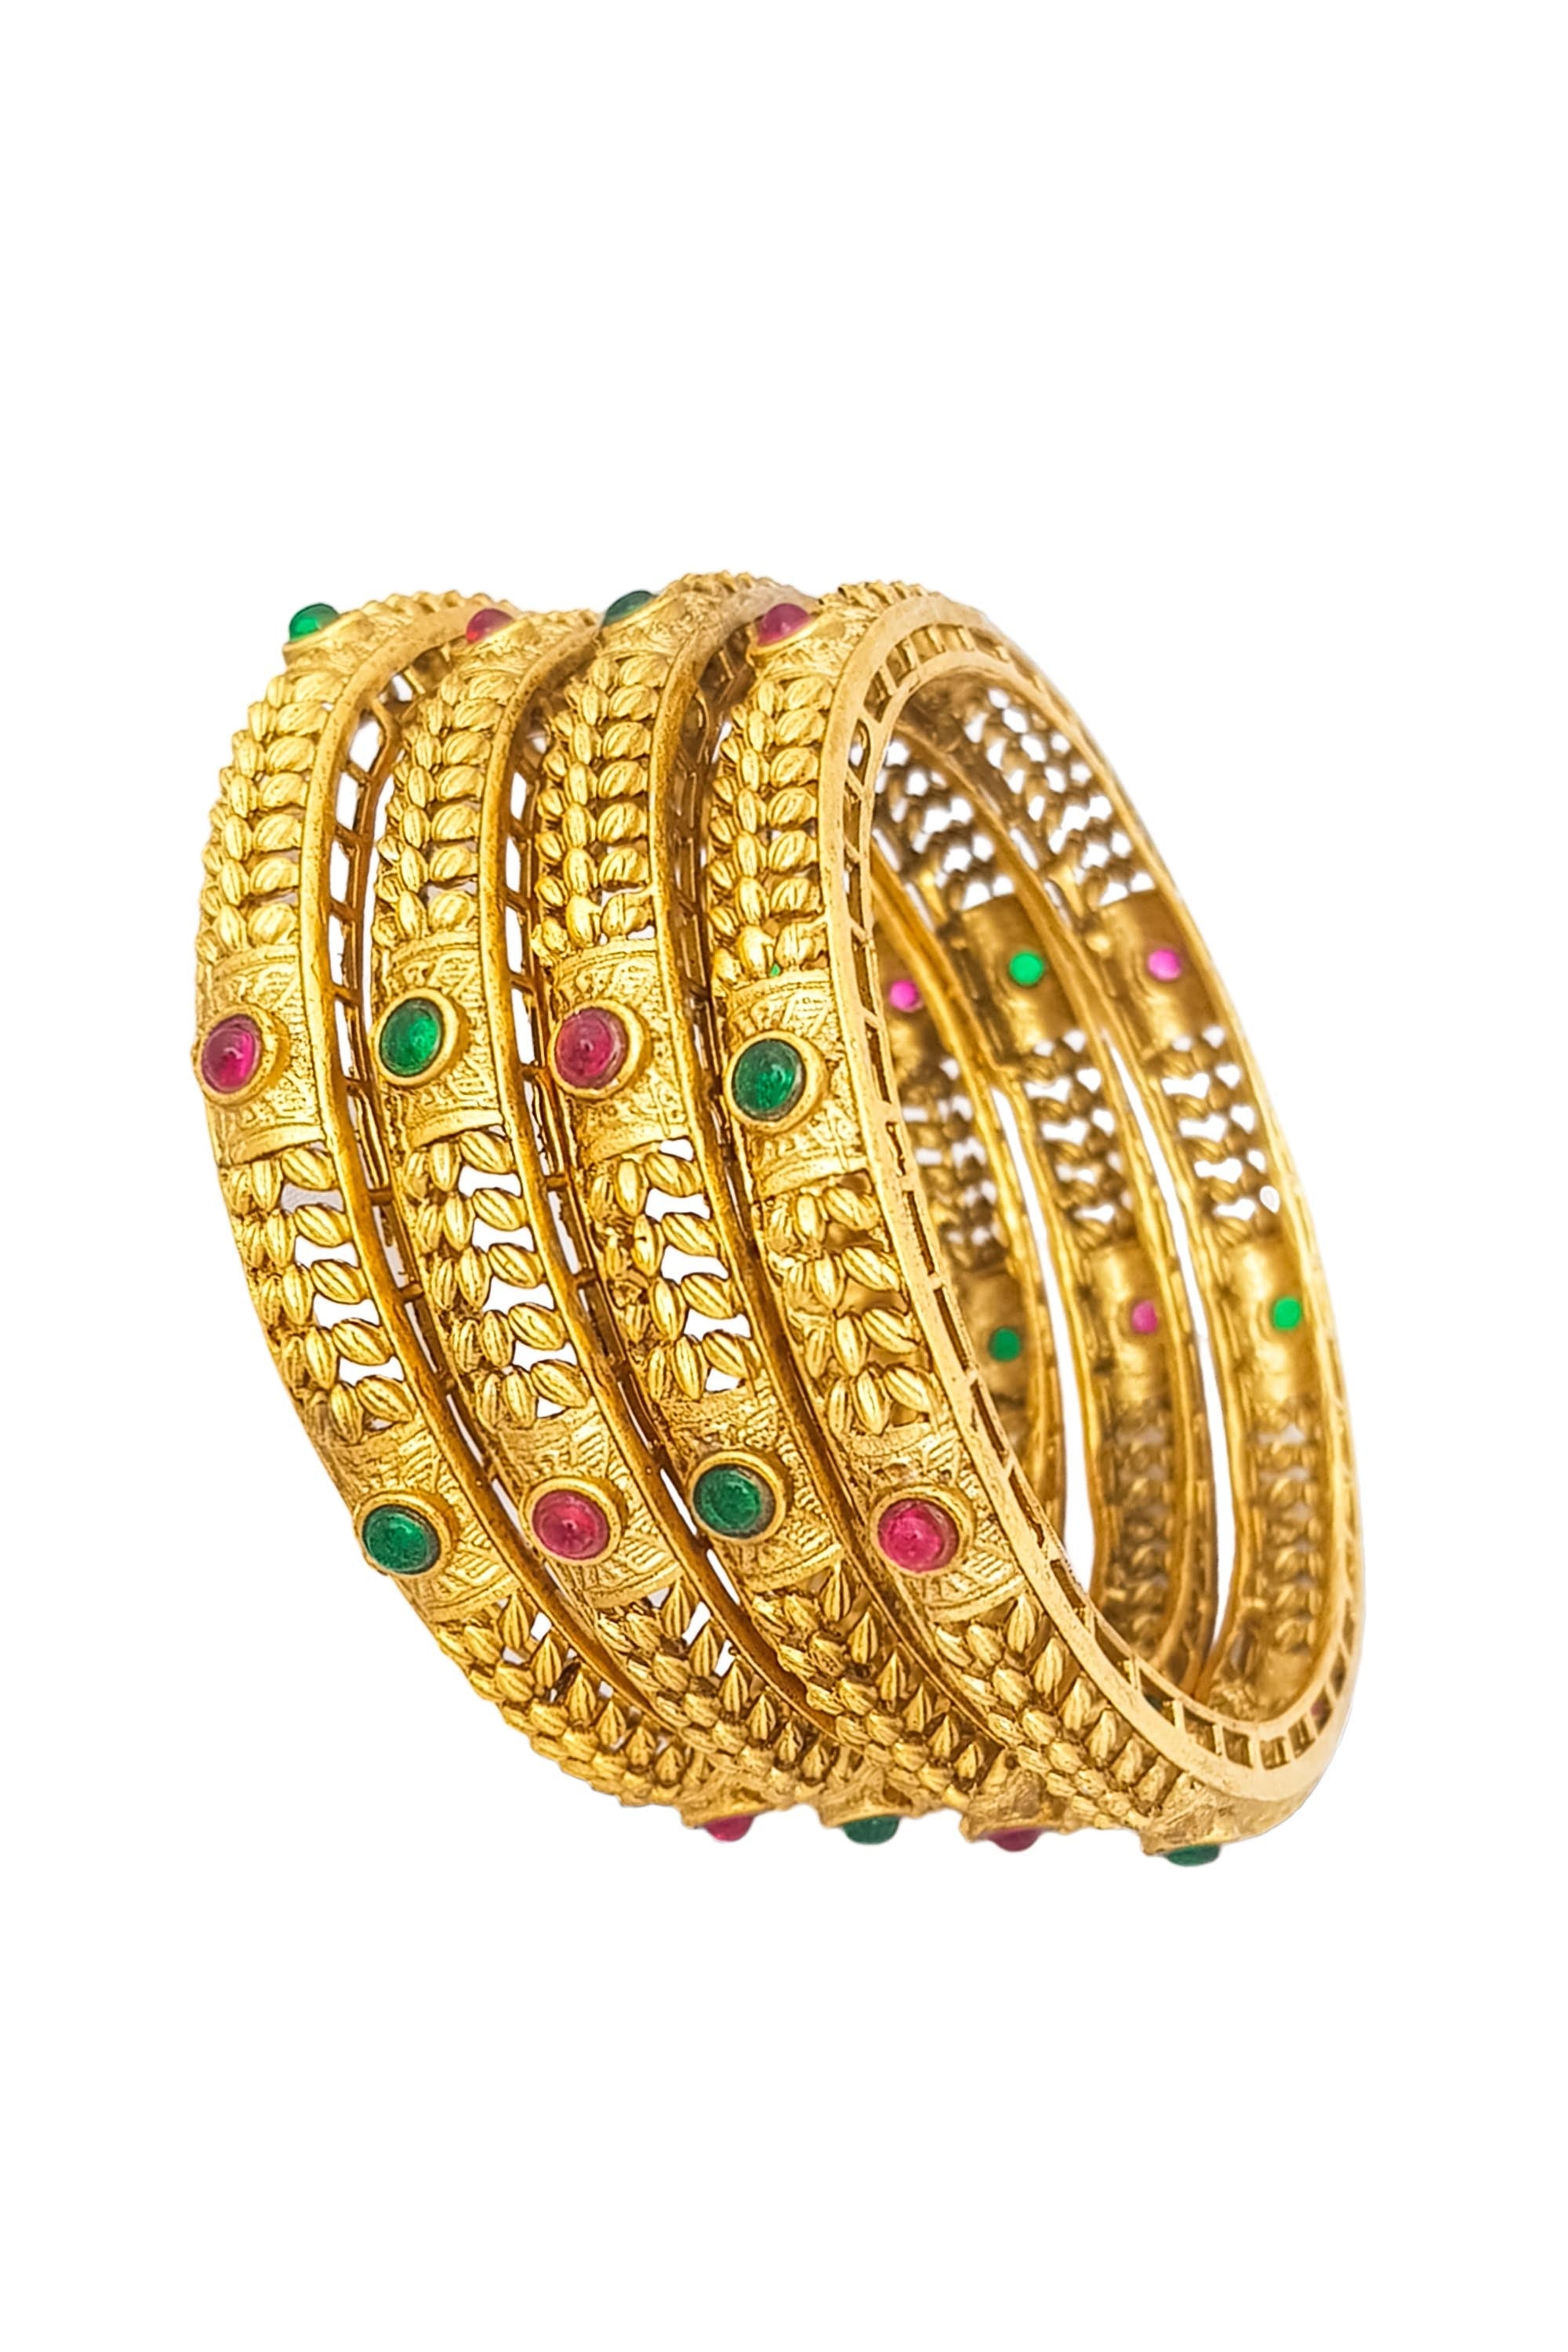 Bangle set of 4 temple collection 18195A